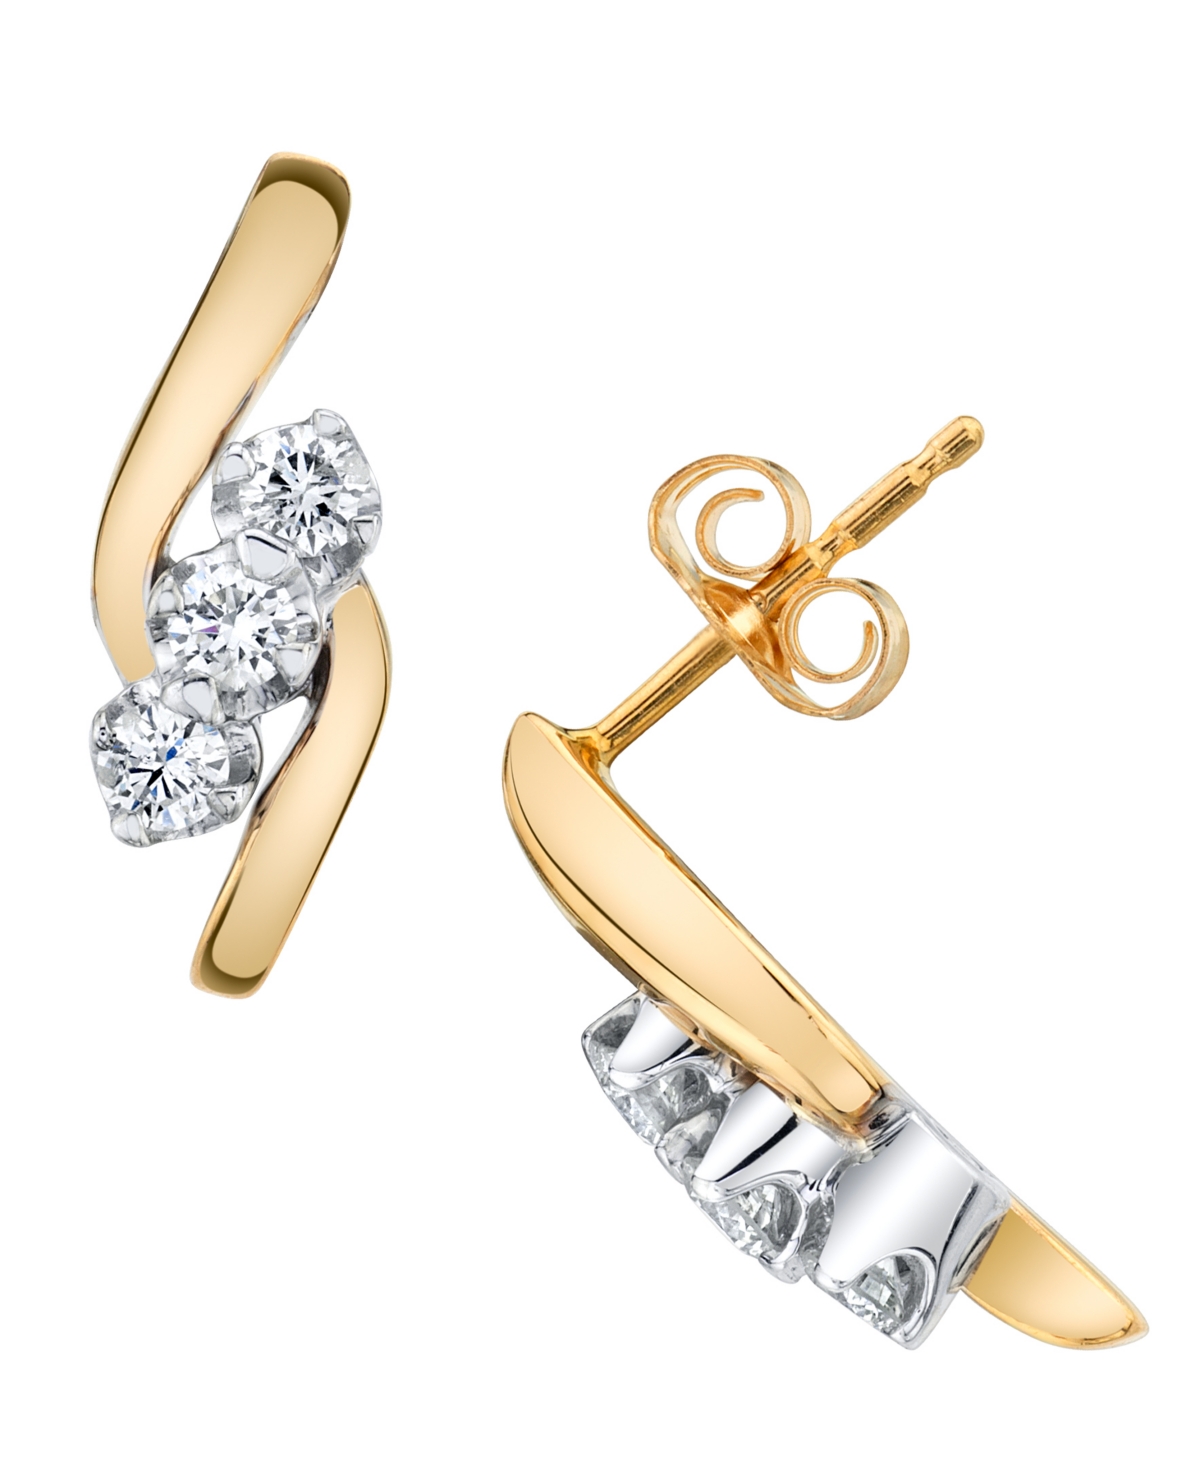 Diamond (1/3 ct. t.w.) Earrings in 14k Yellow and White Gold